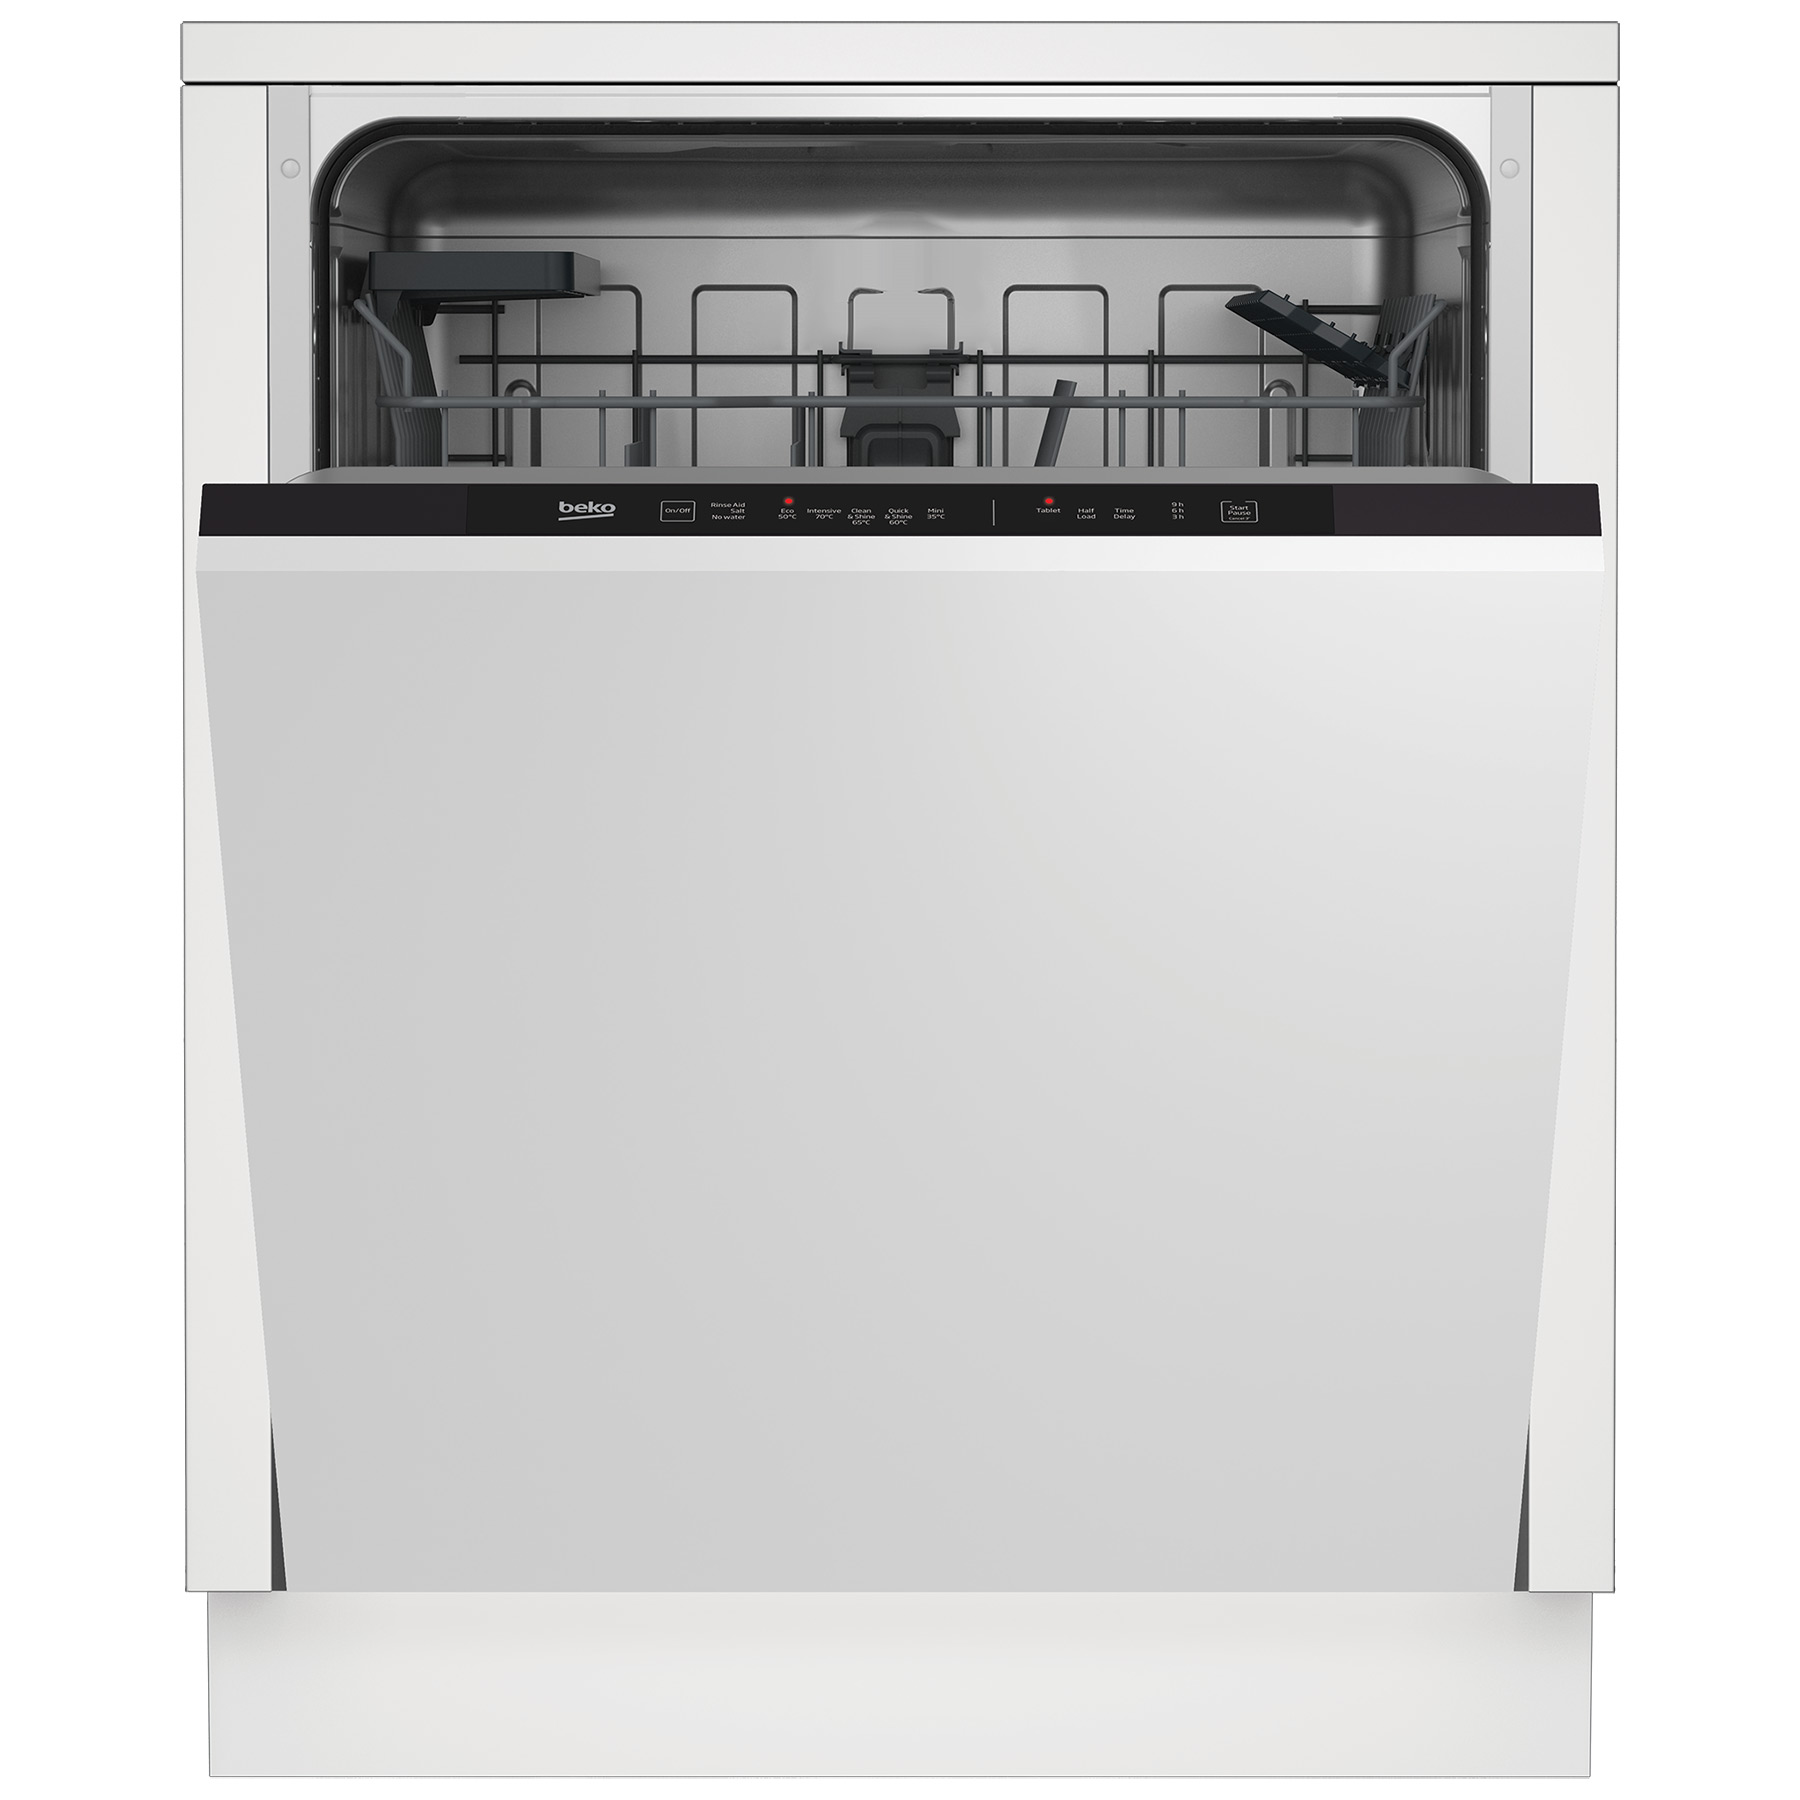 Image of Beko DIN15C20 60cm Fully Integrated Dishwasher 14 Place E Rated